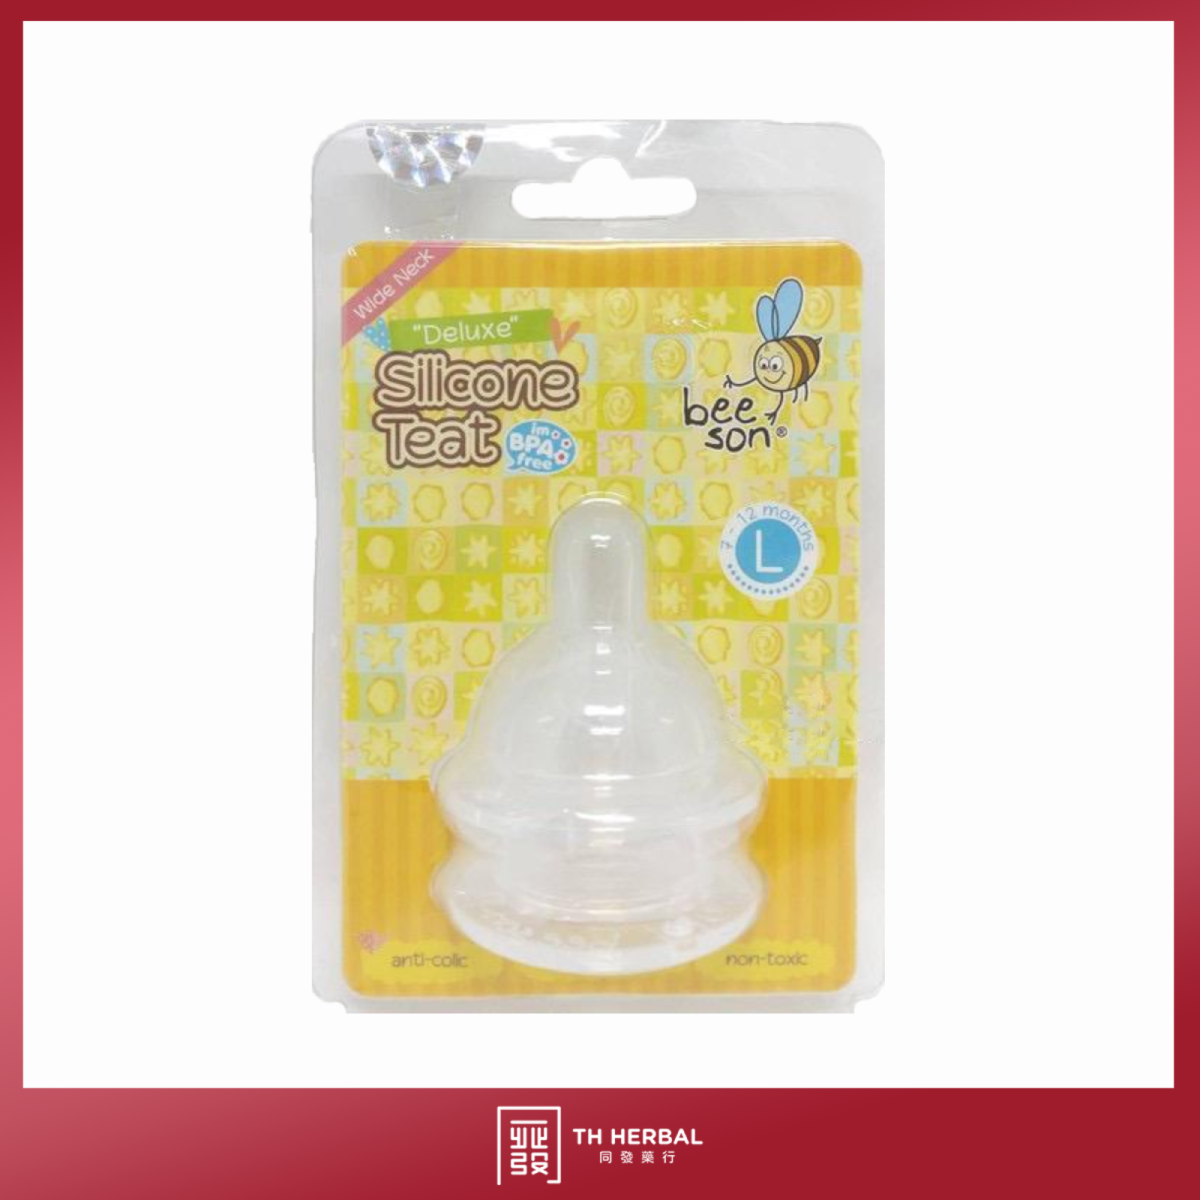 Beeson Deluxe Wide Neck Silicone Teat Anti Colic European Standard (4).png